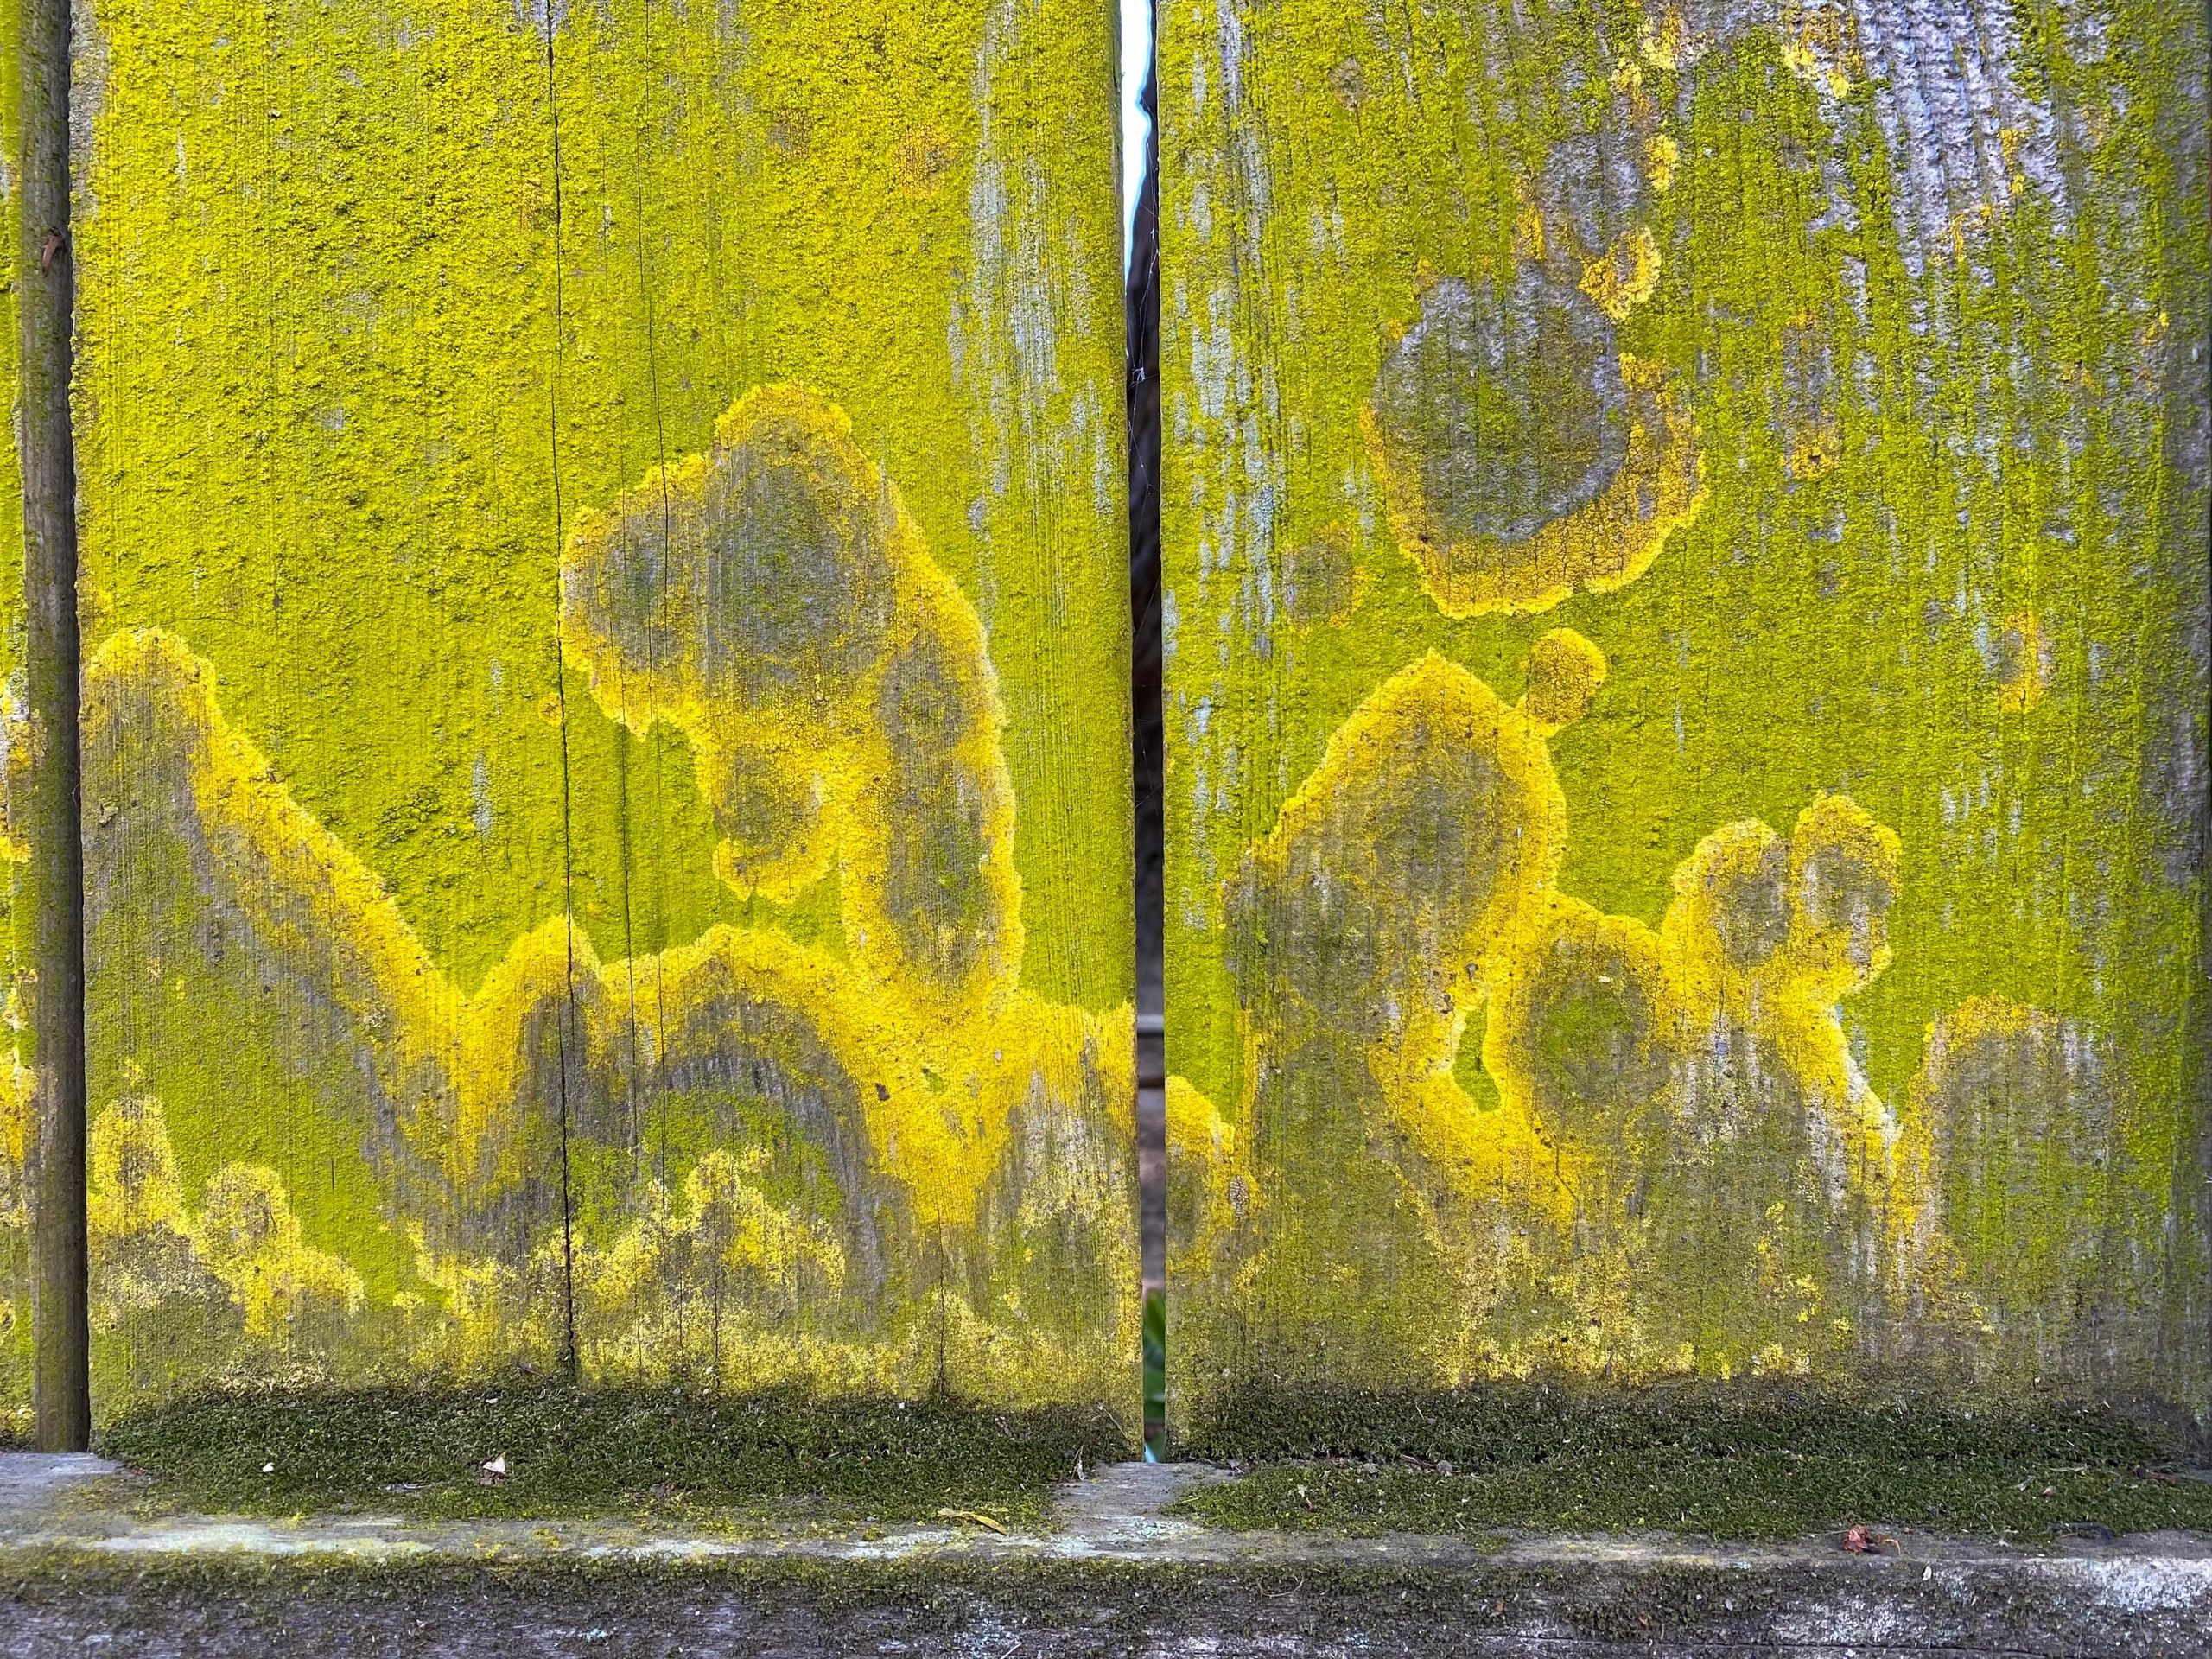 Art by Mother Nature, cartoon characters   on the fence, lichen, moss, algae, yellows and greens